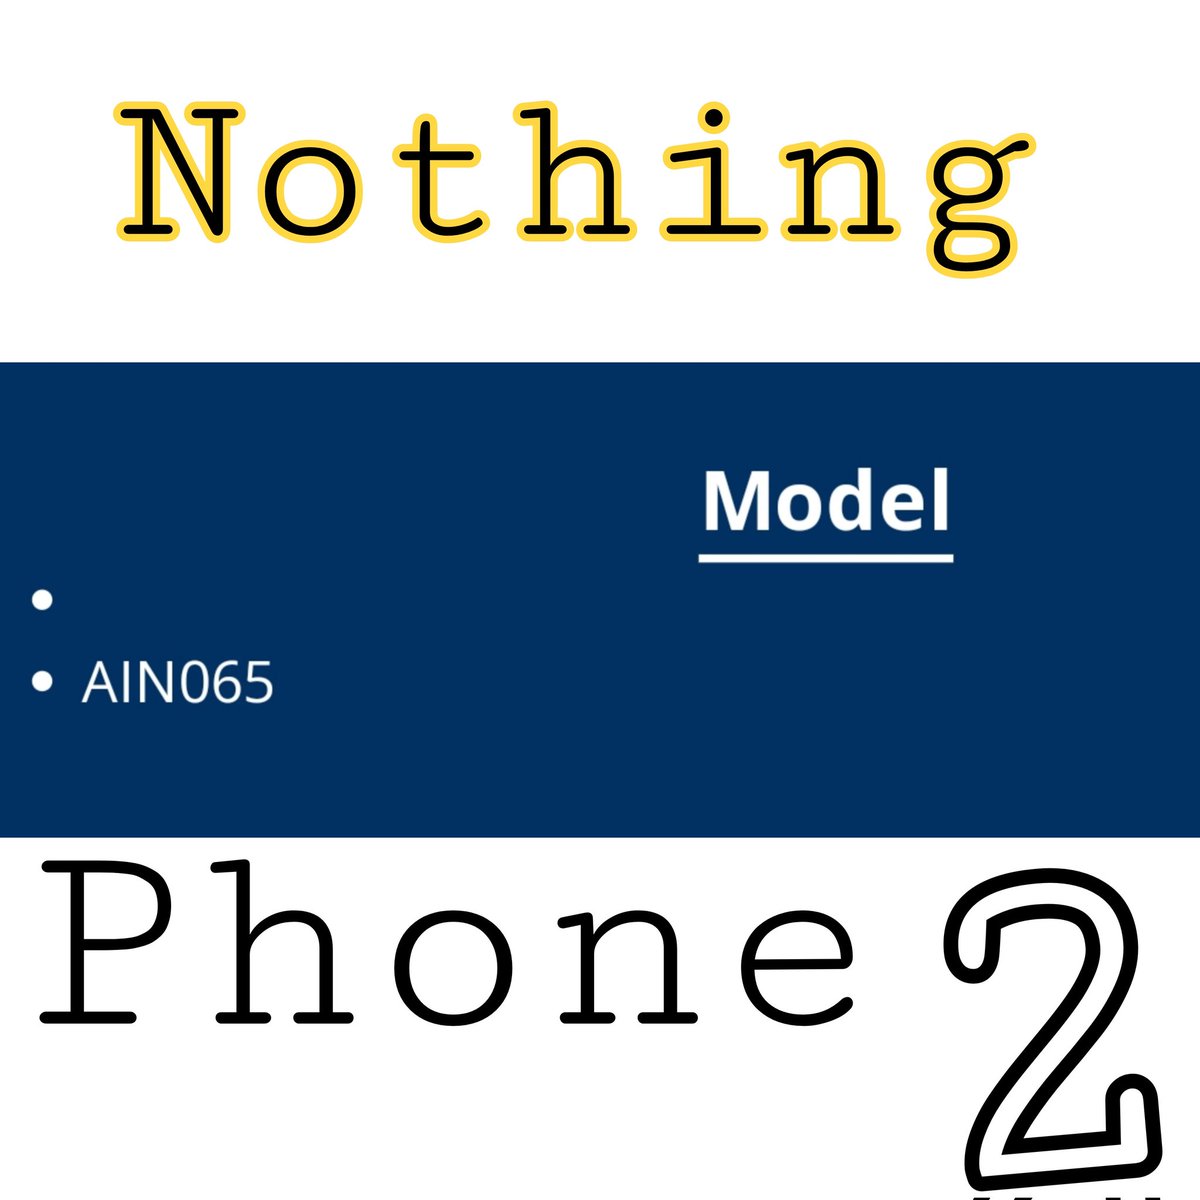 Nothing Phone (2) with model number 'AINO65' has
cleared India's BIS certification. Expect it to launch soon in India

#NothingPhone2 #Nothing
#nothingphone #nothing #g #xiaomi #unboxing #pro #nothingphoneindia #techblogger #indiablogger #indianblogger #design #mobiletrends